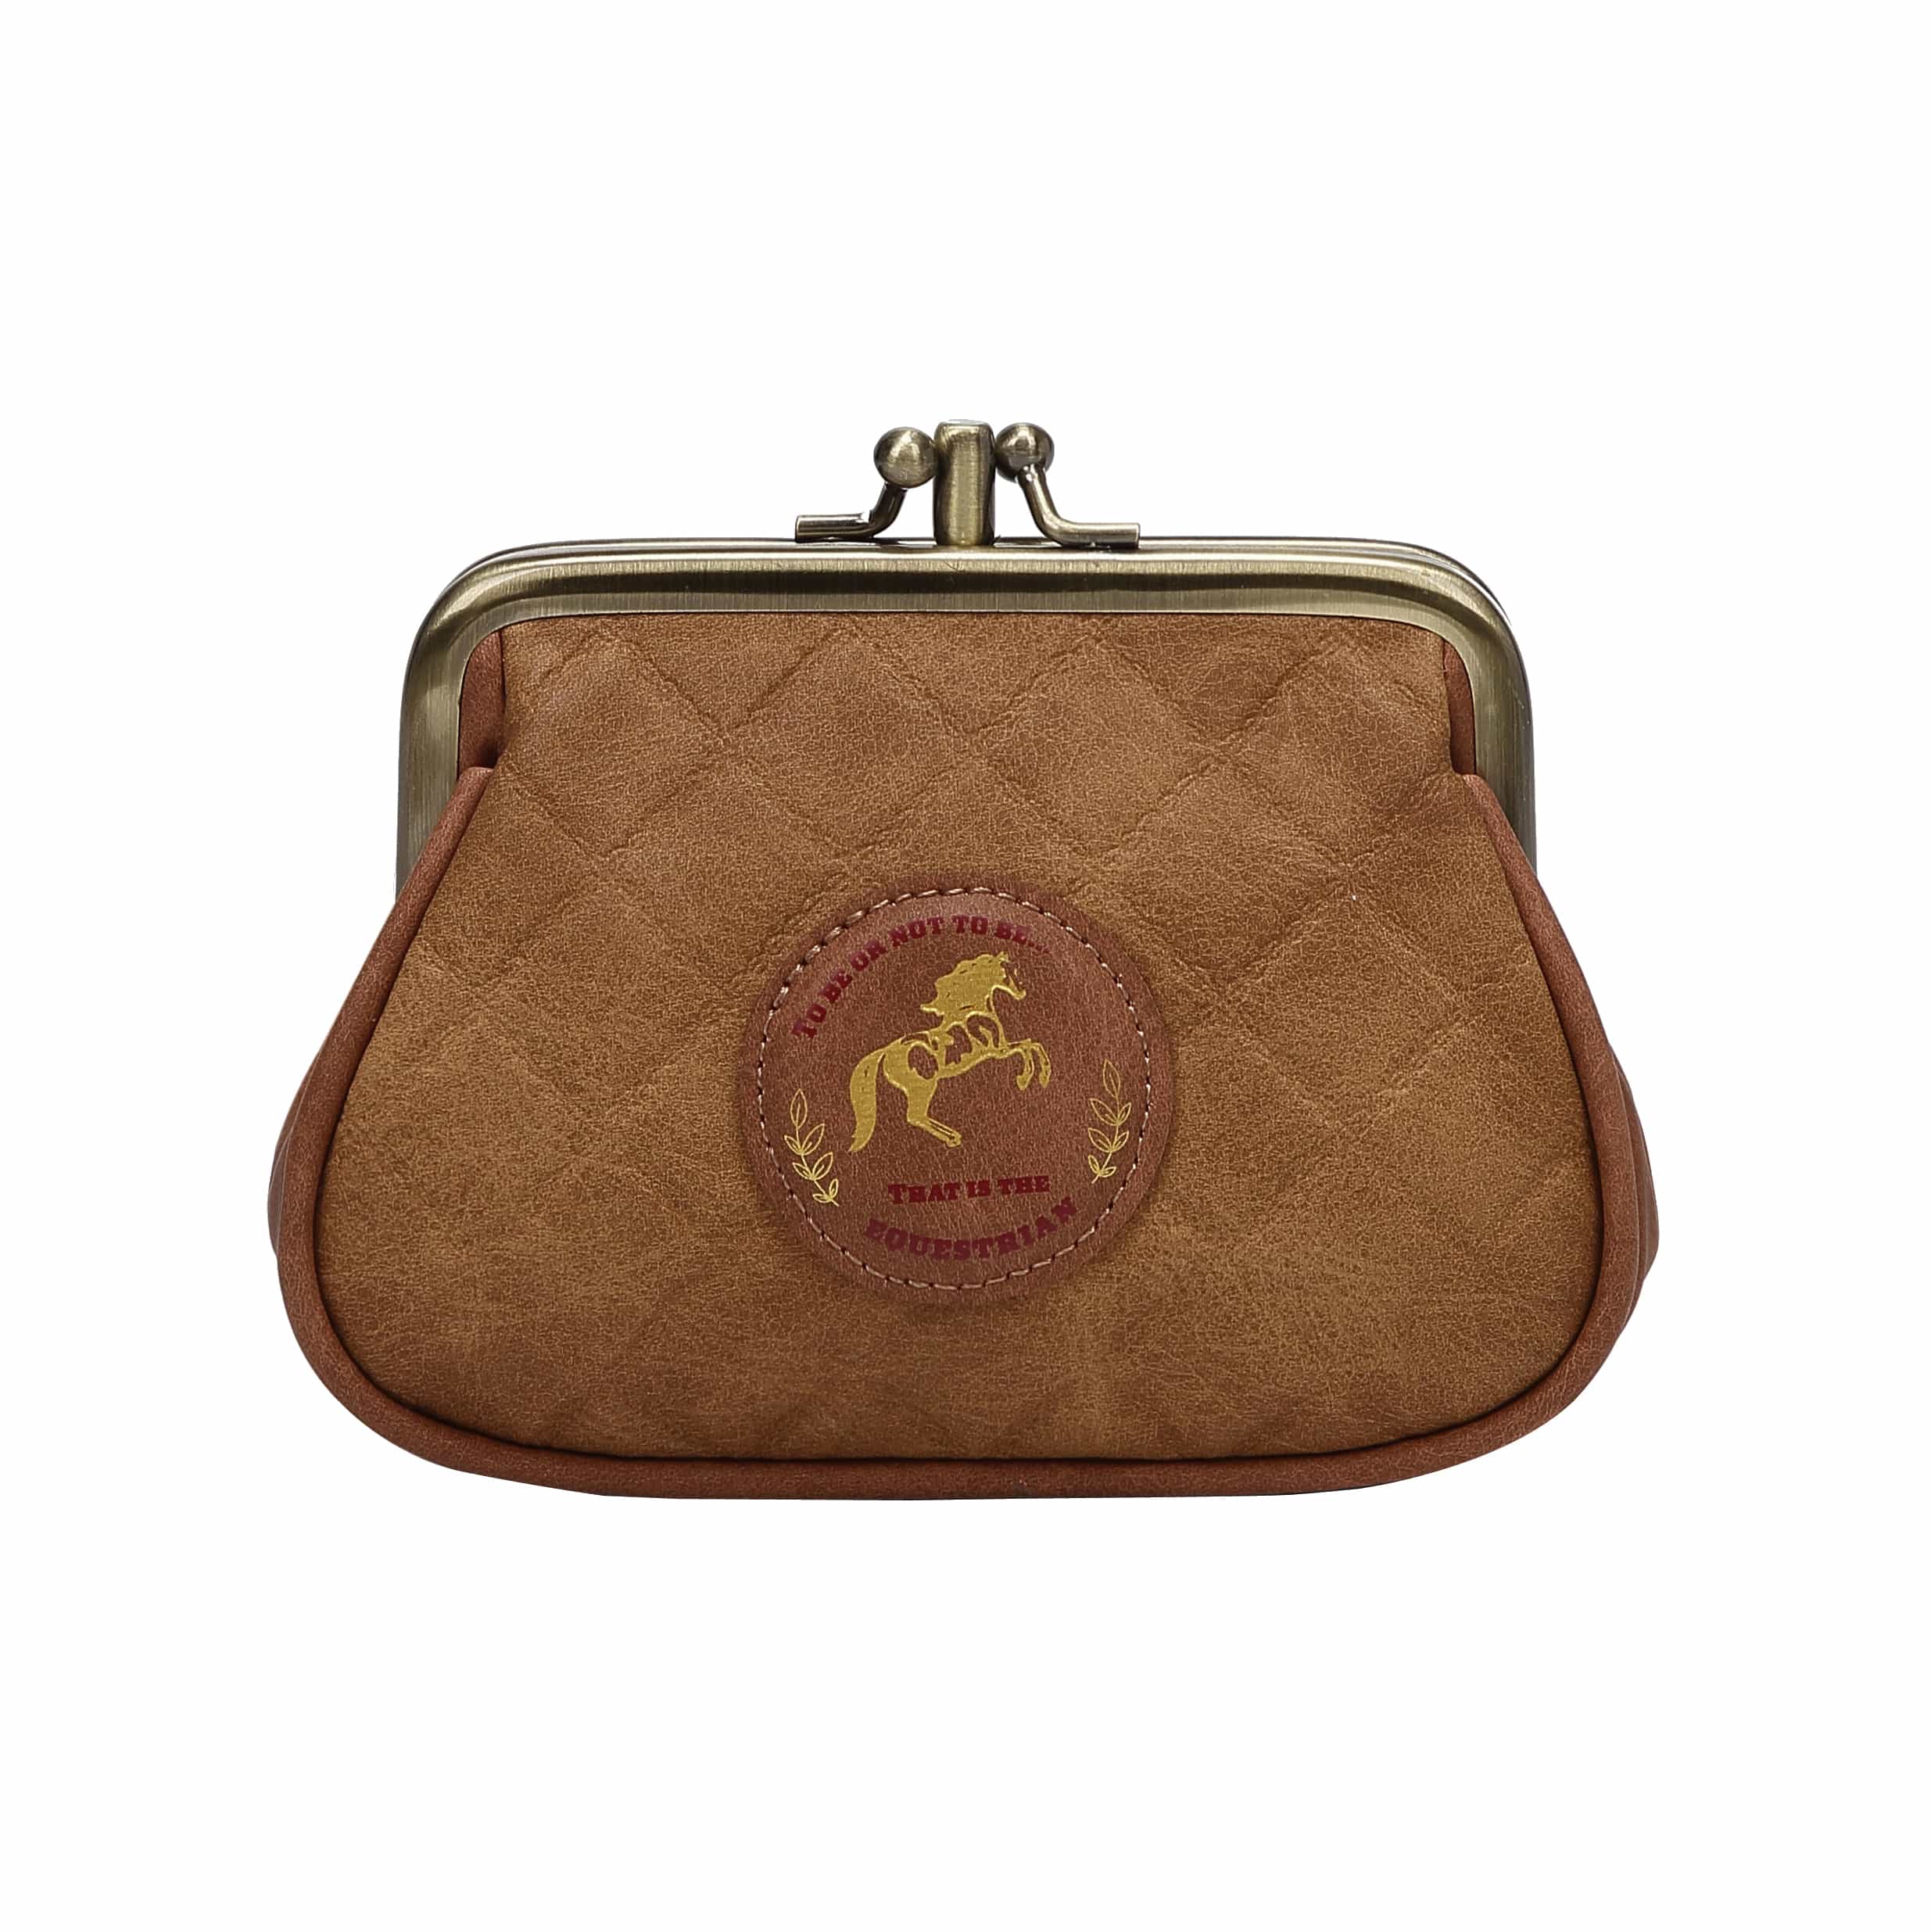 Leather Coin Purses | Women's Coin Purses | Aspinal of London